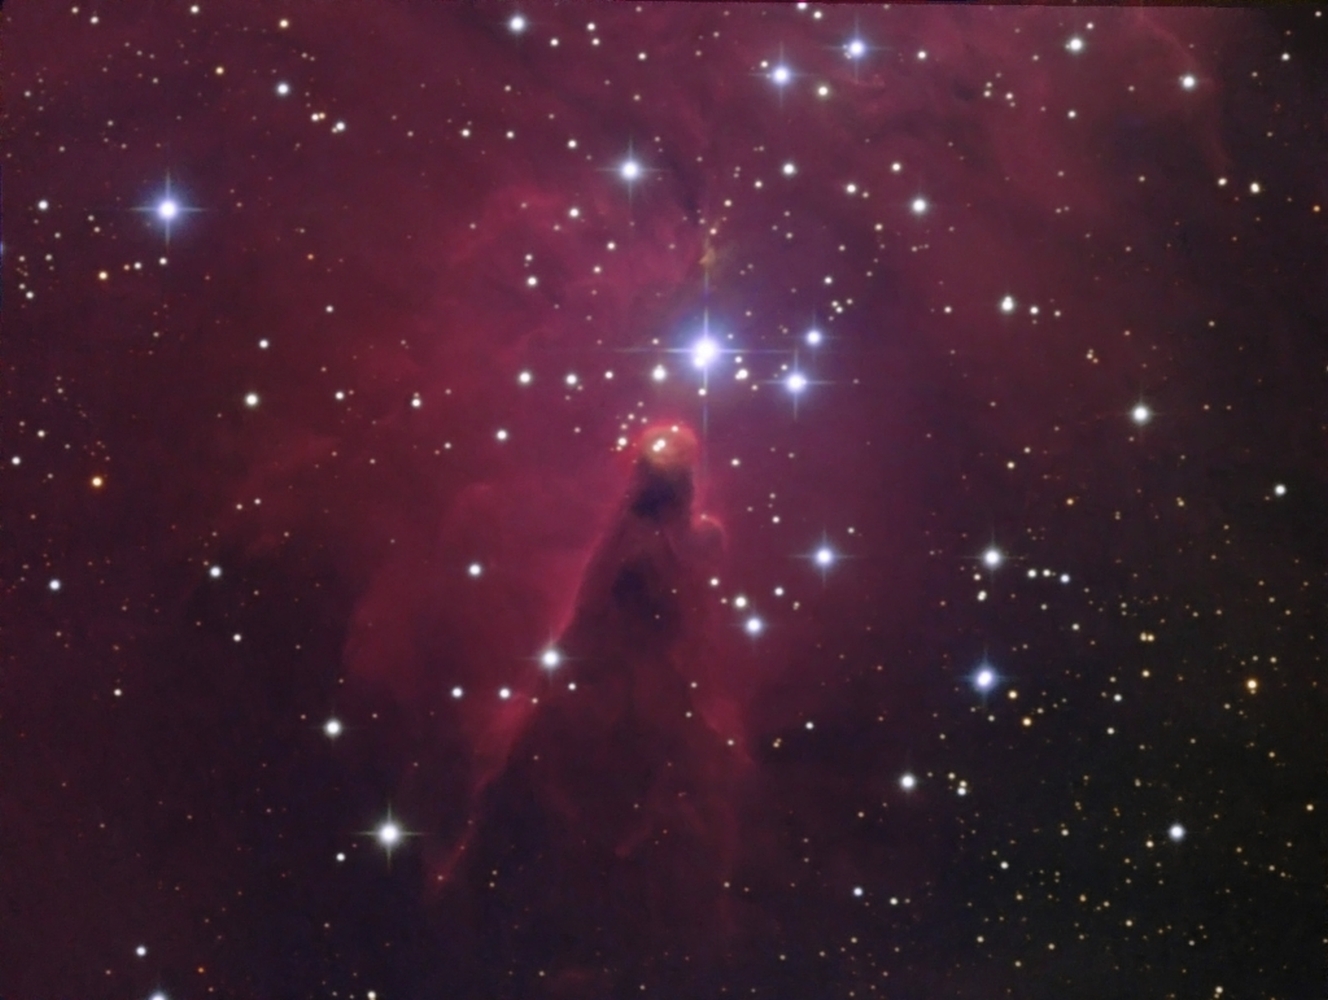 NGC 2264 from BMV Observatories